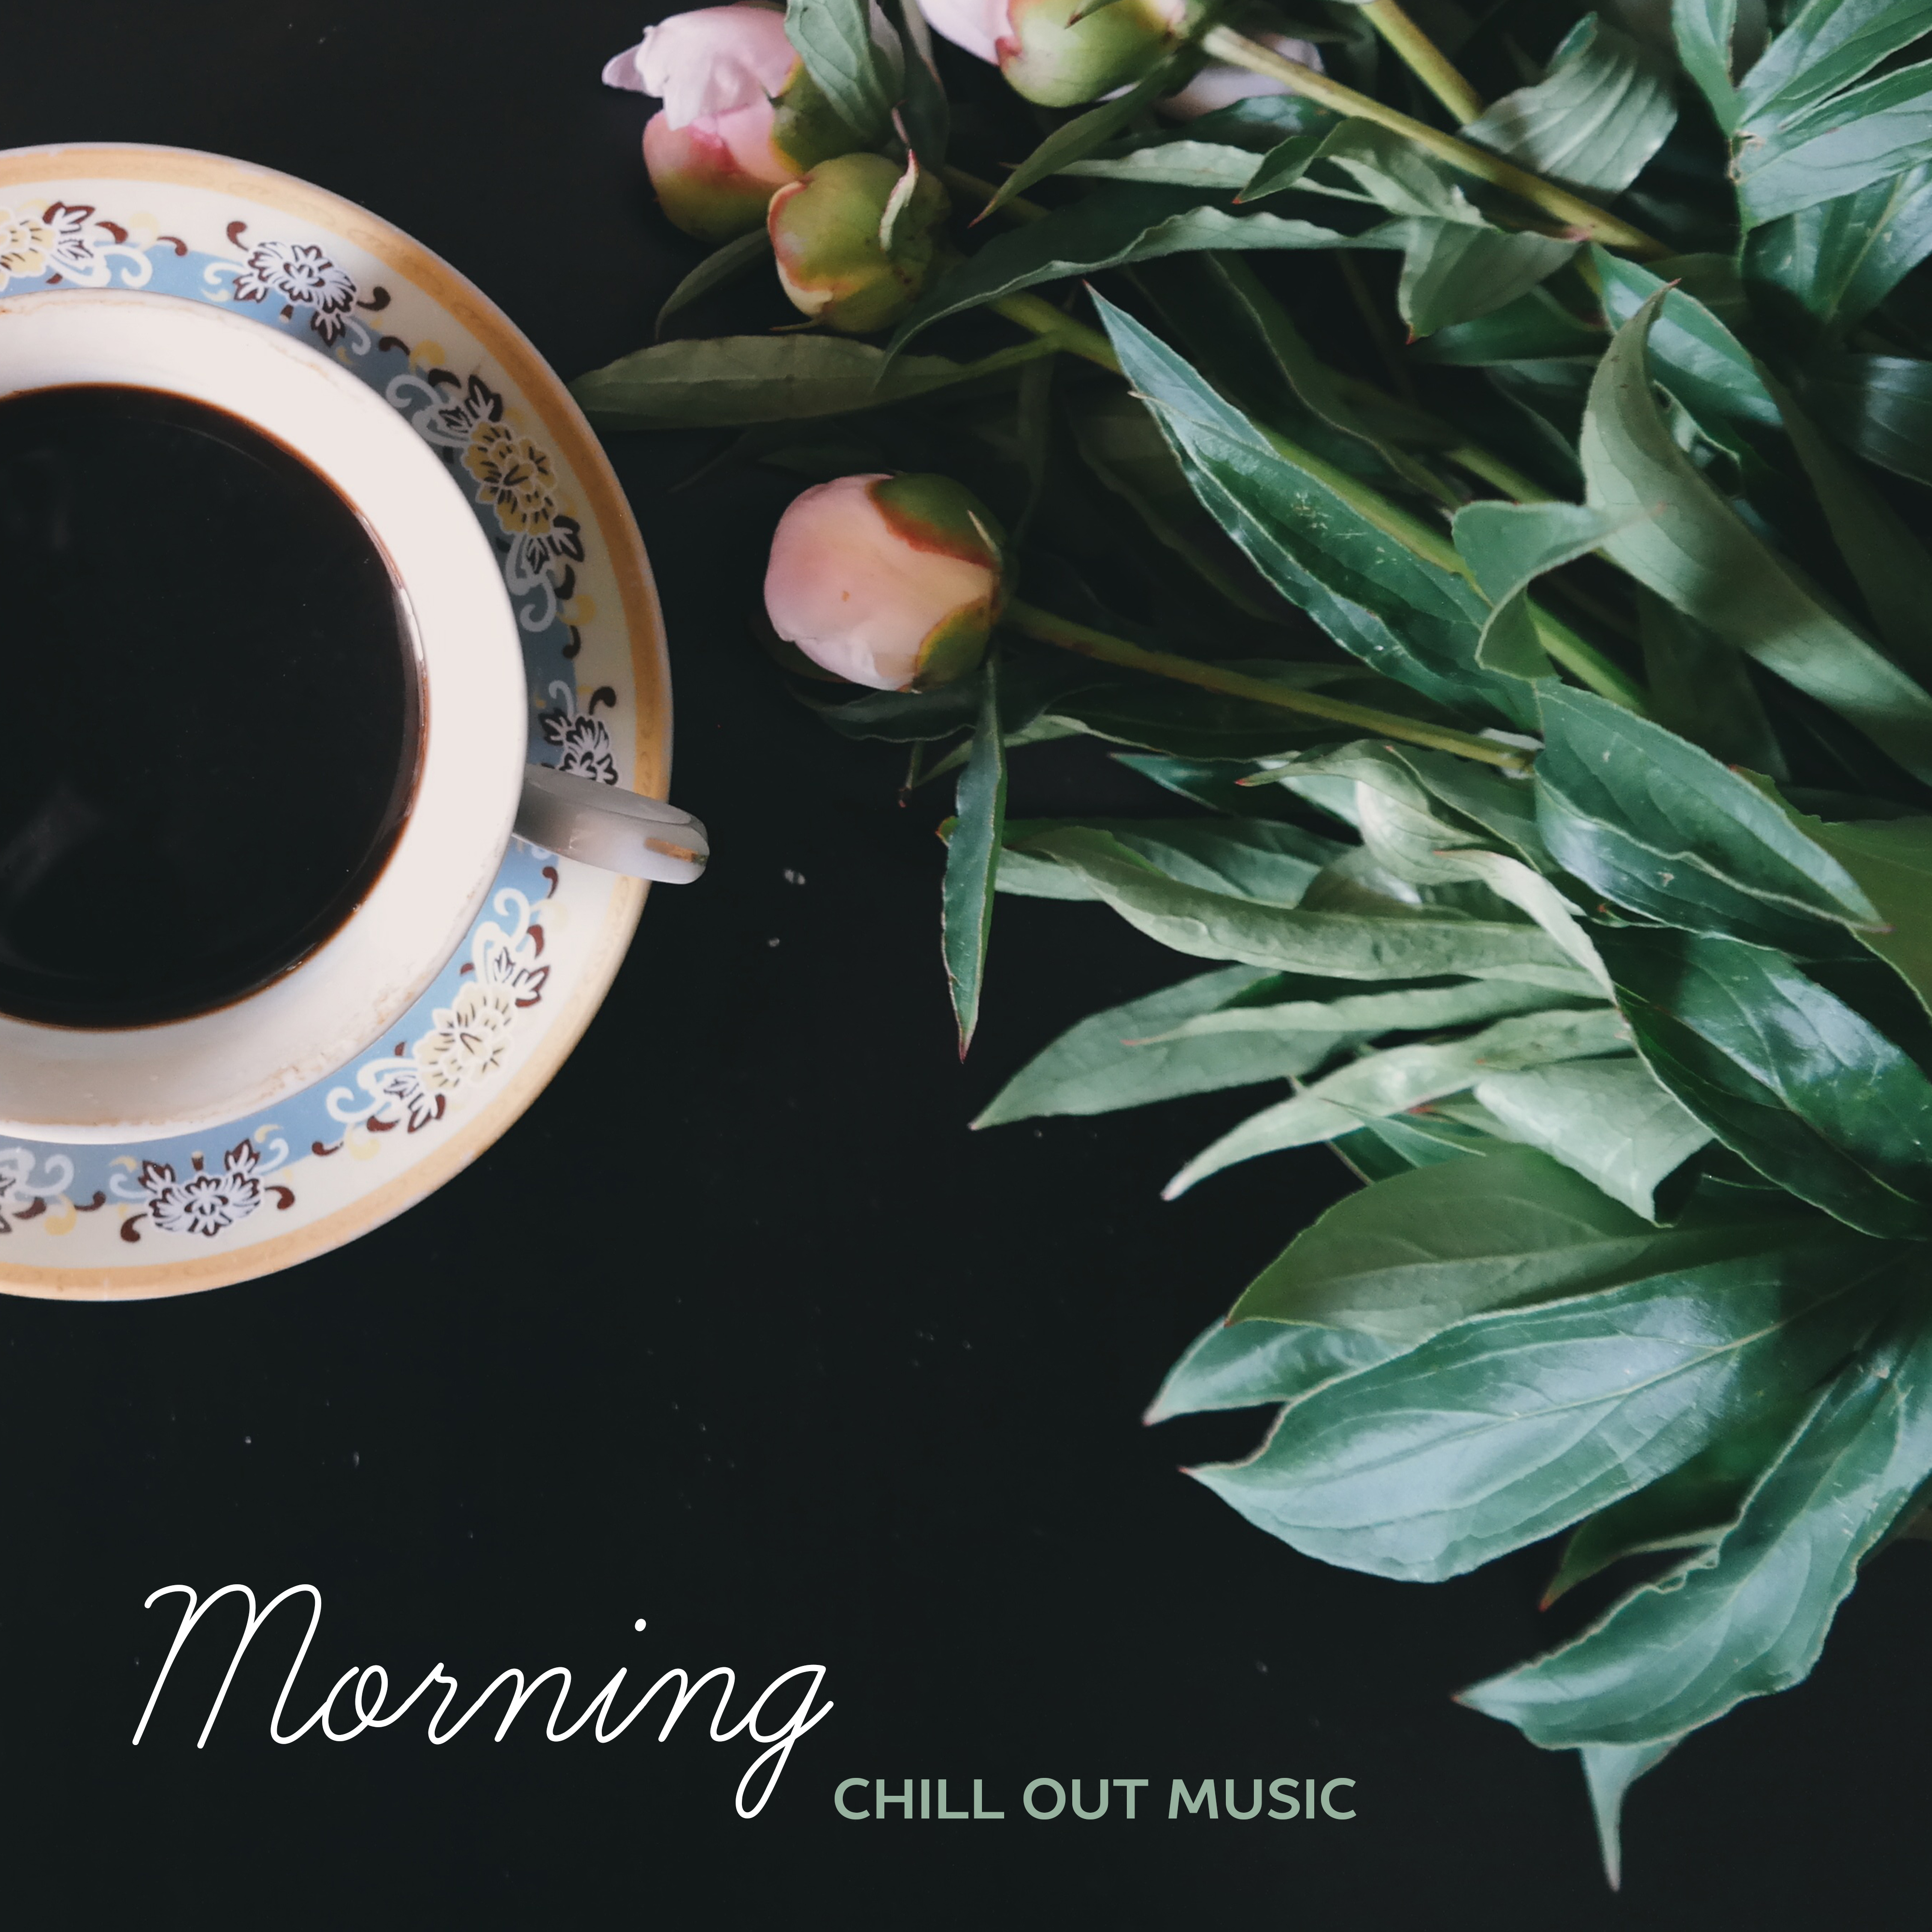 Morning Chill Out Music  Soft Sounds to Relax, Easy Listening, Morning Breeze